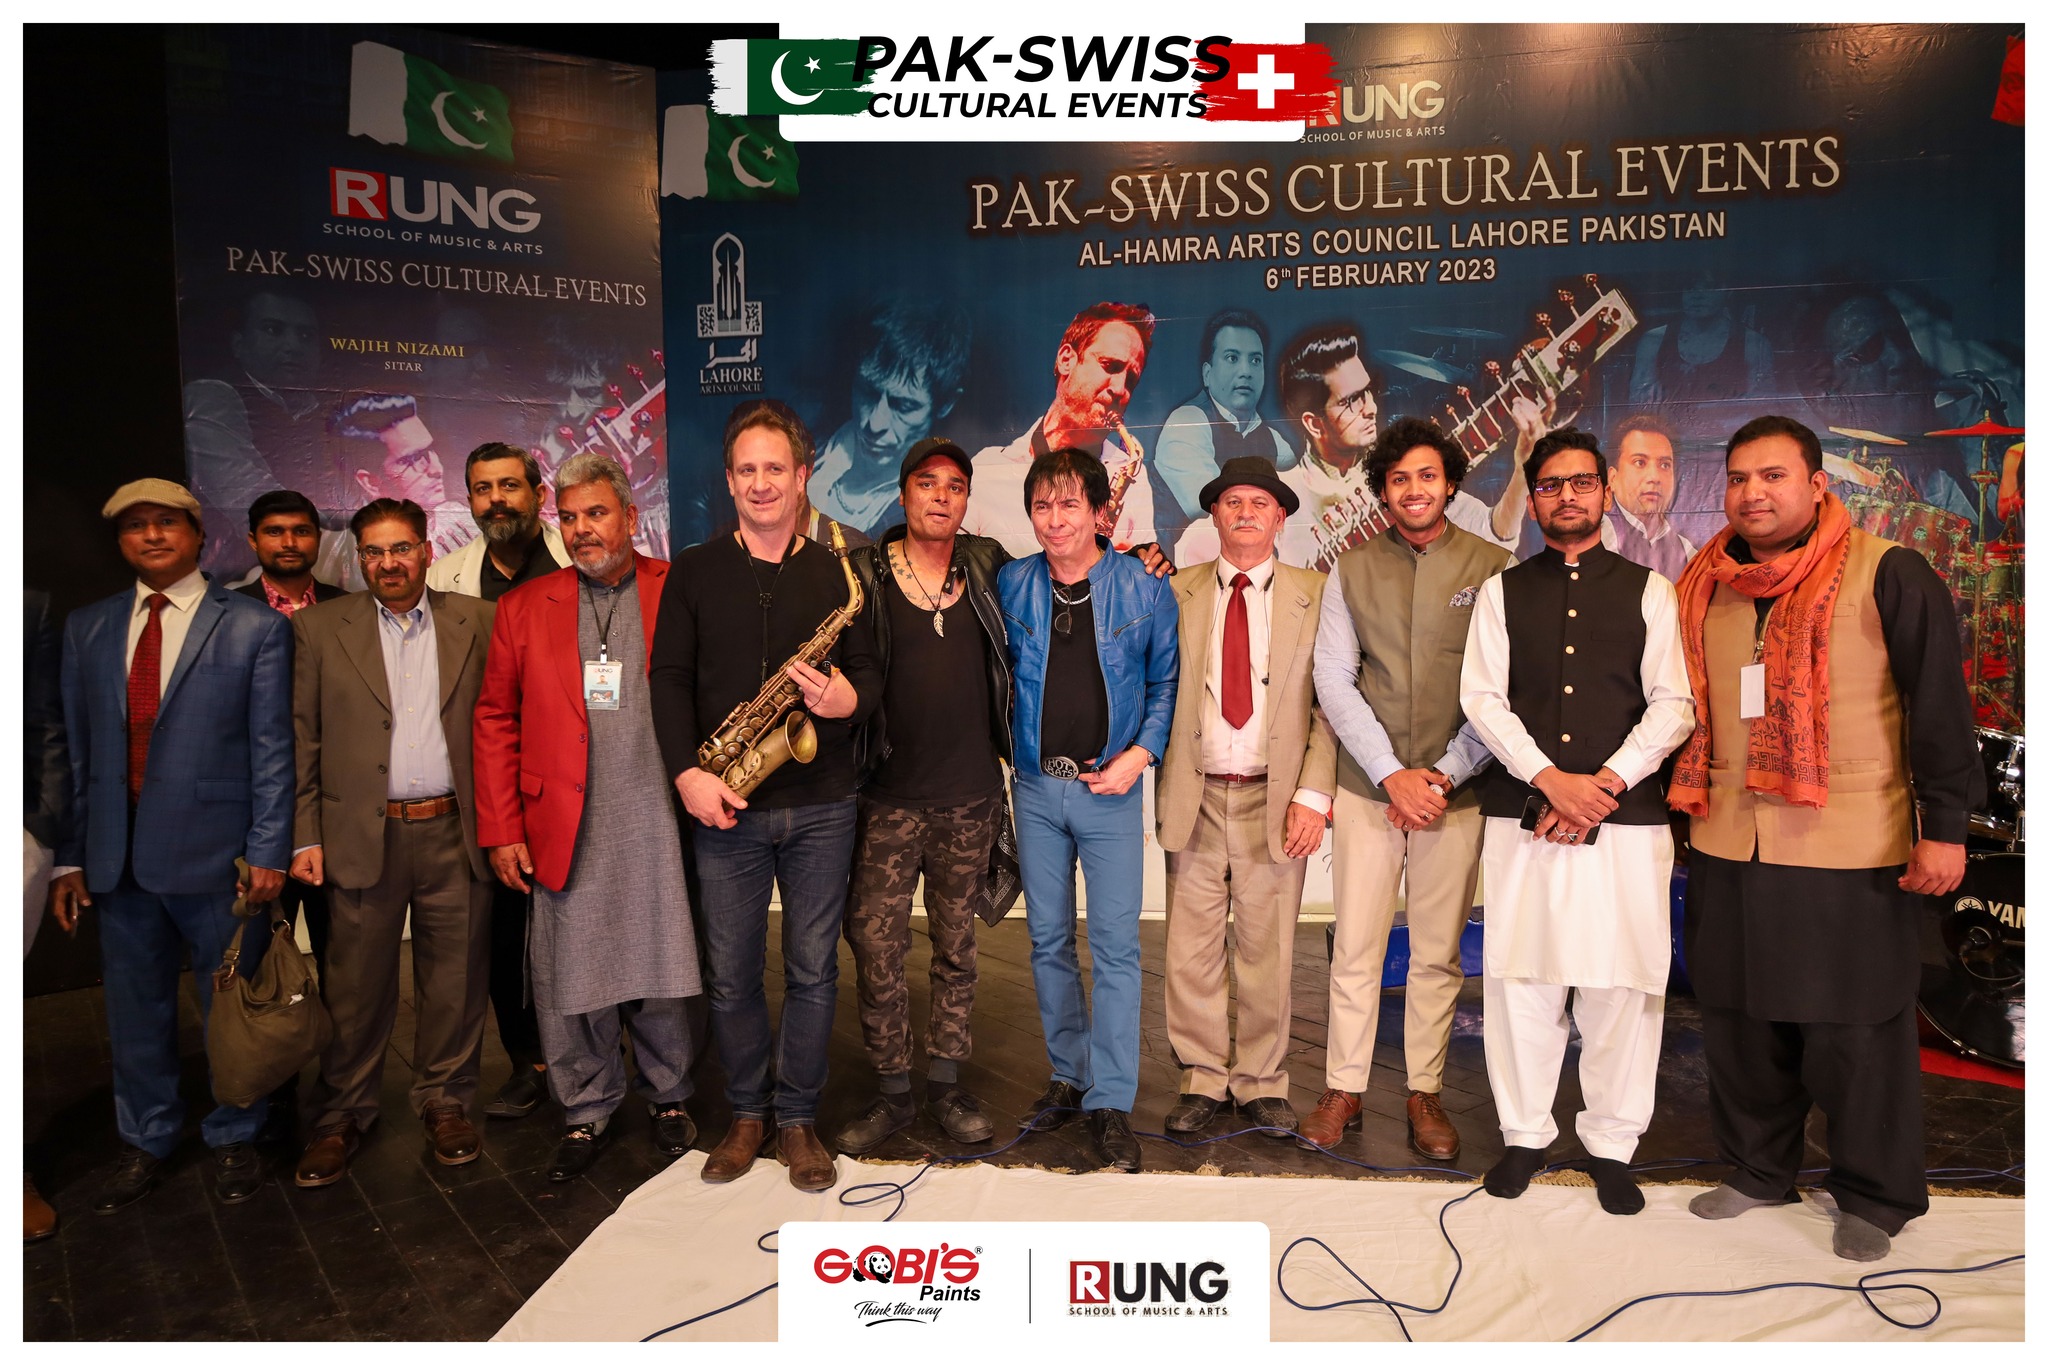 Pak-Swiss Cultural Event 23, the fourth chapter